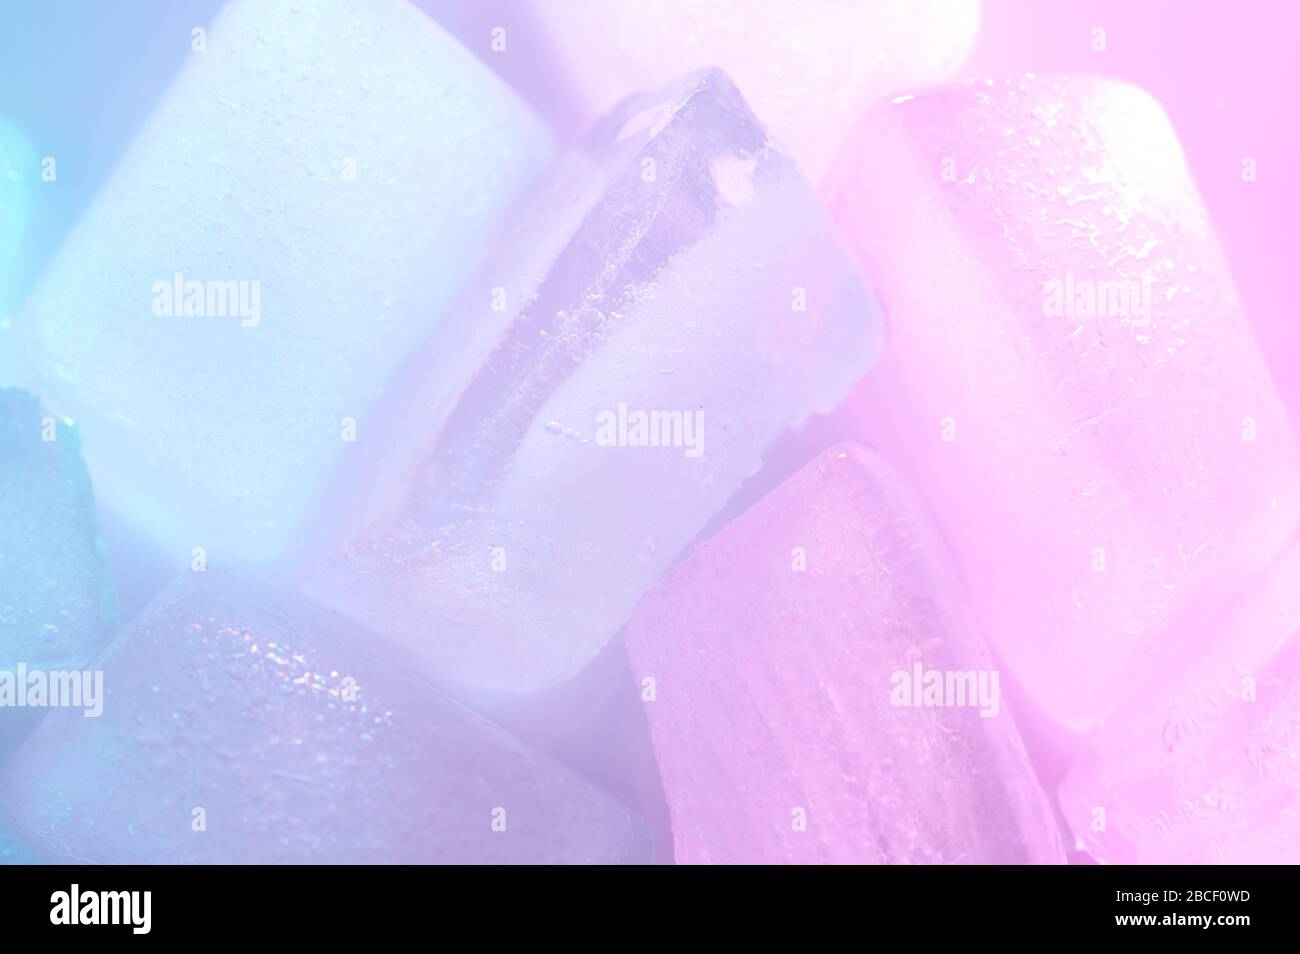 Pink and blue ice bricks macro close up view background Stock Photo